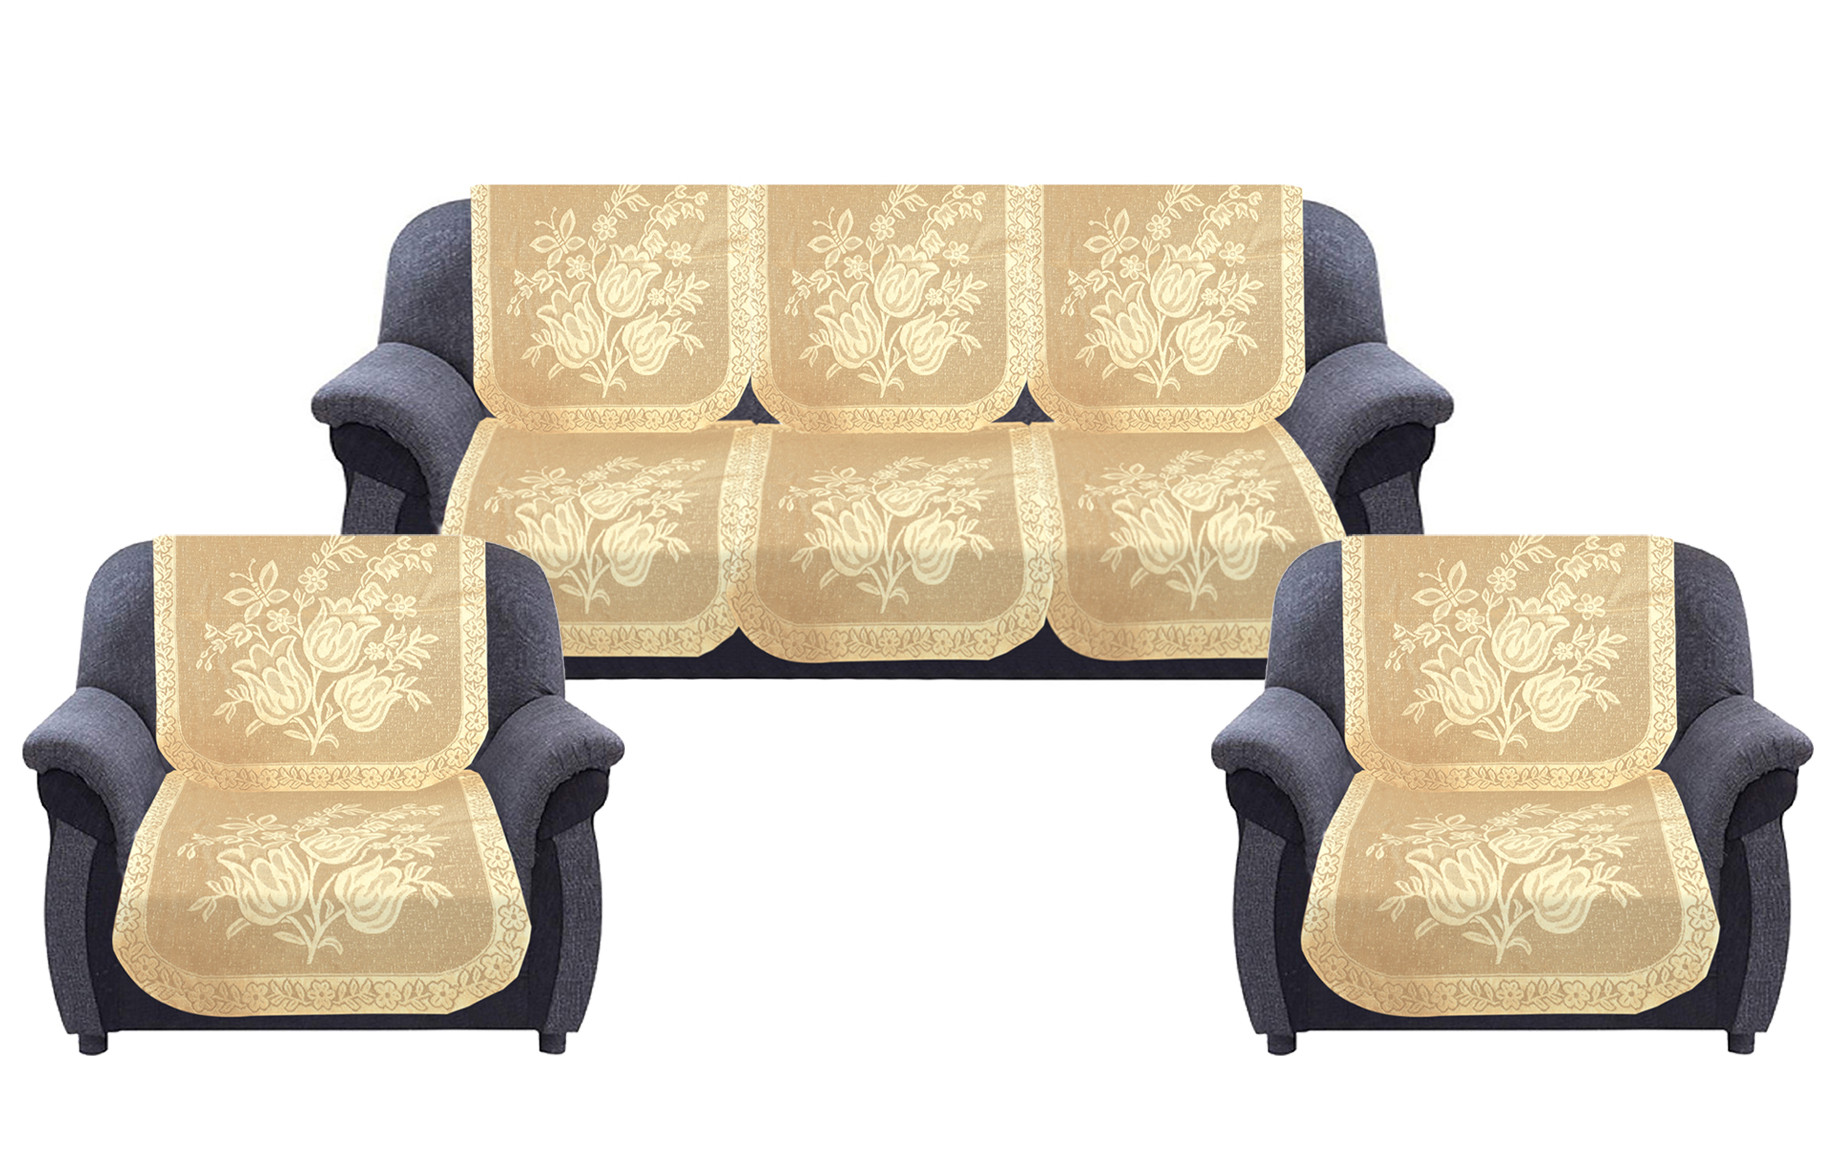 Kuber Industries Flower Printed 5 Seater Cotton Sofa Cover Set (Cream)-44KM0525